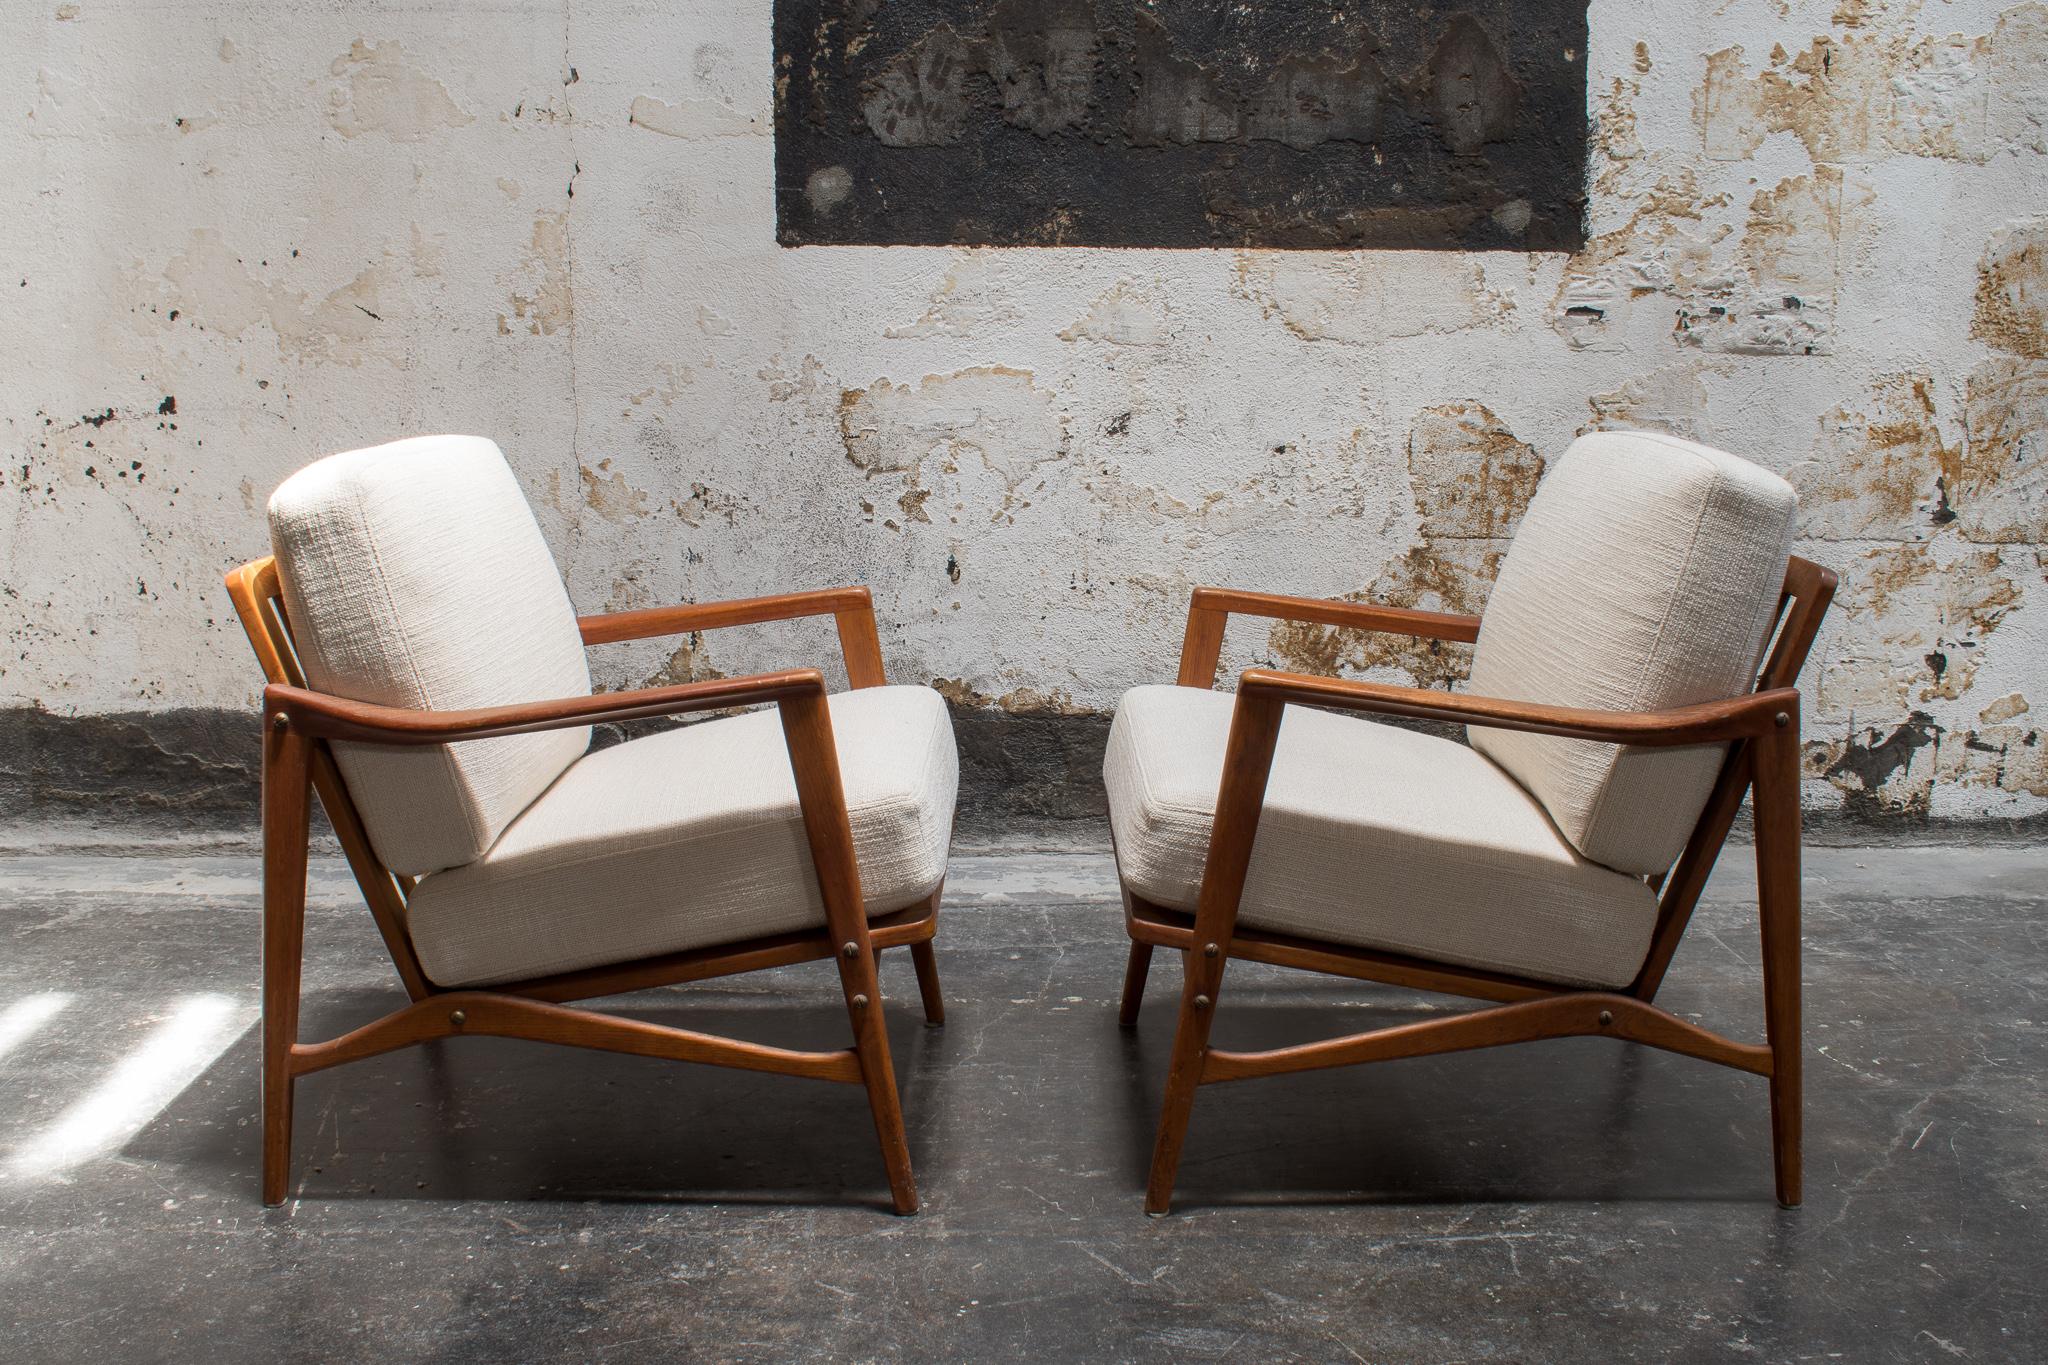 Pair of vintage Mid-Century Modern teak armchairs with newly reupholstered cushions. Made by OPE, sleek Swedish design ensures that these chairs work in a variety of settings and styles! Versatile, beautiful, and ready to be yours.

-28